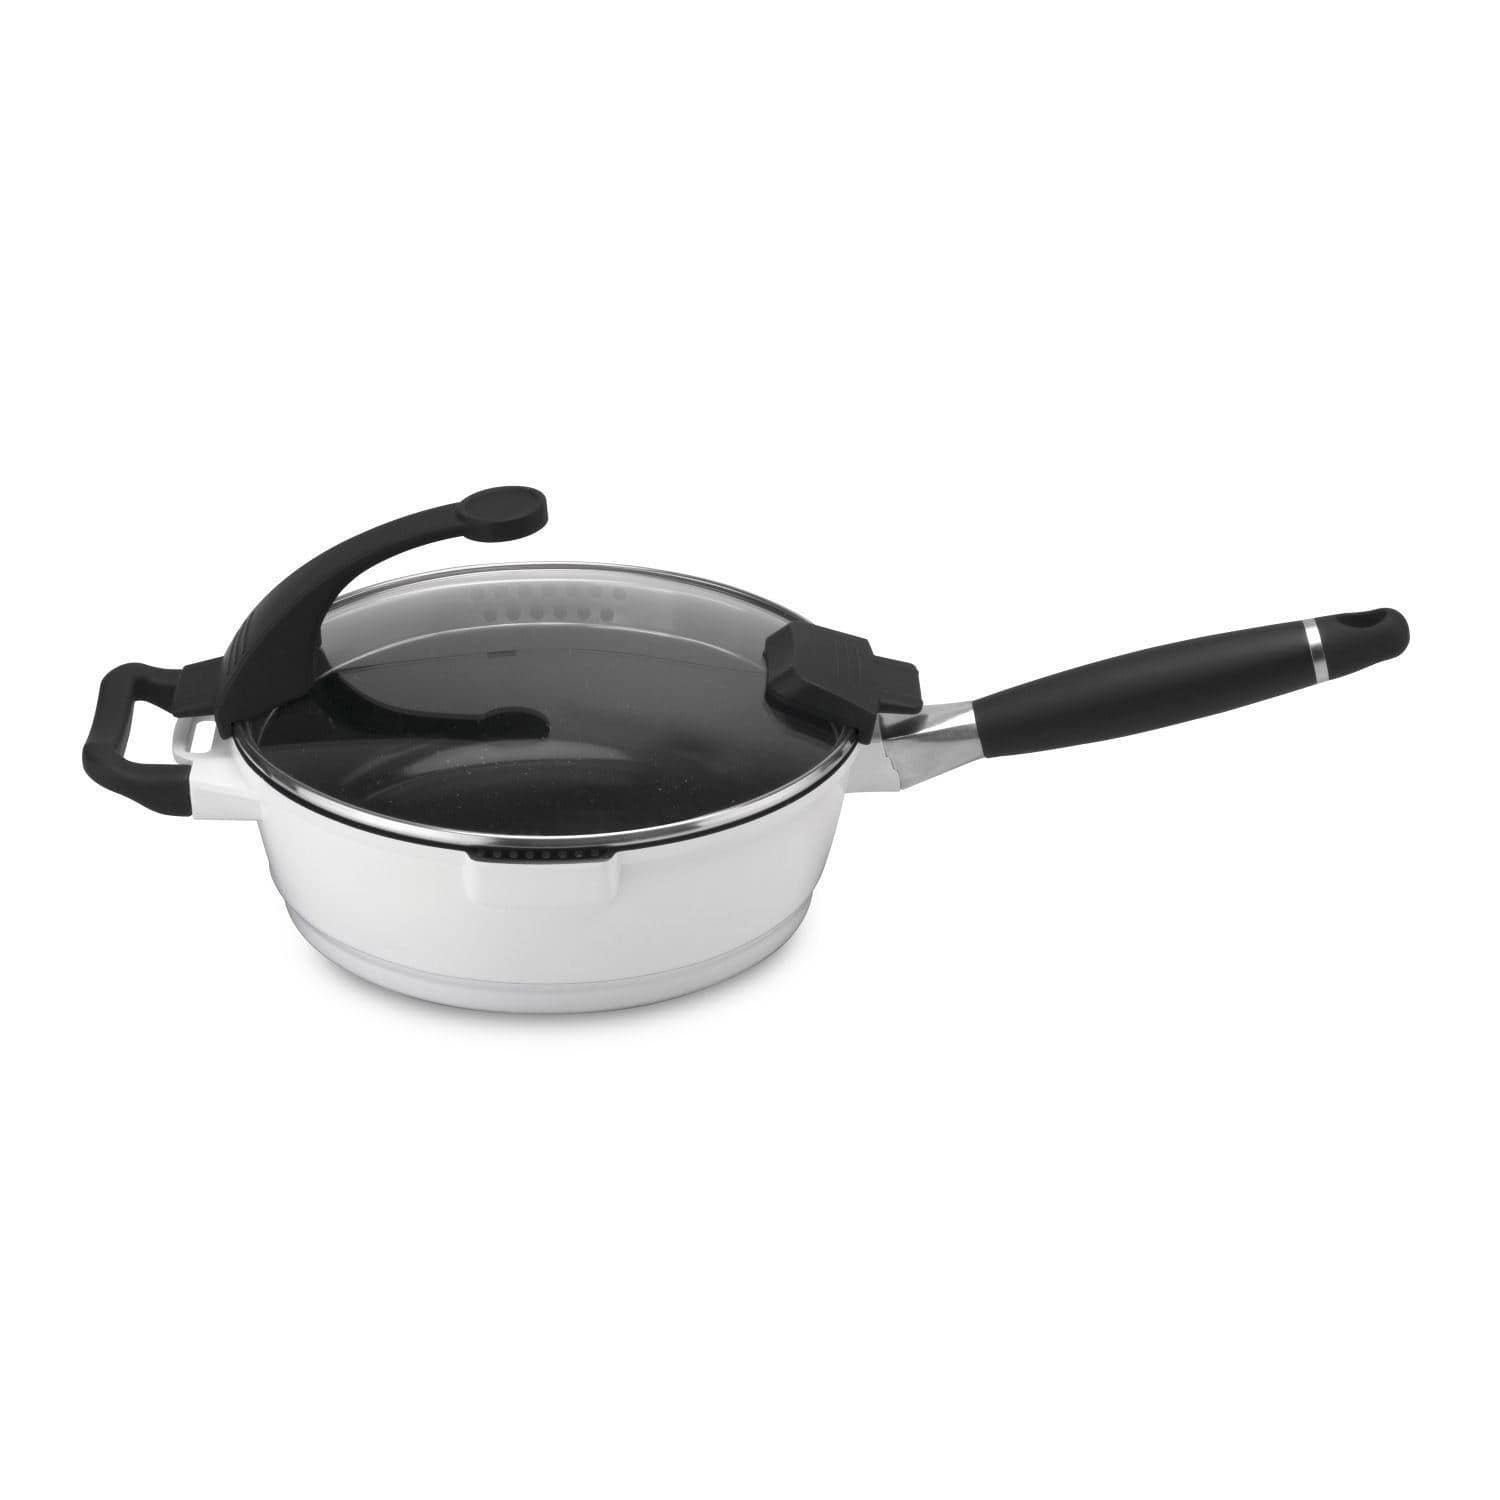 BergHOFF Virgo Deep Skillet with Cover - White, 24 cm - 2304549 - Jashanmal Home